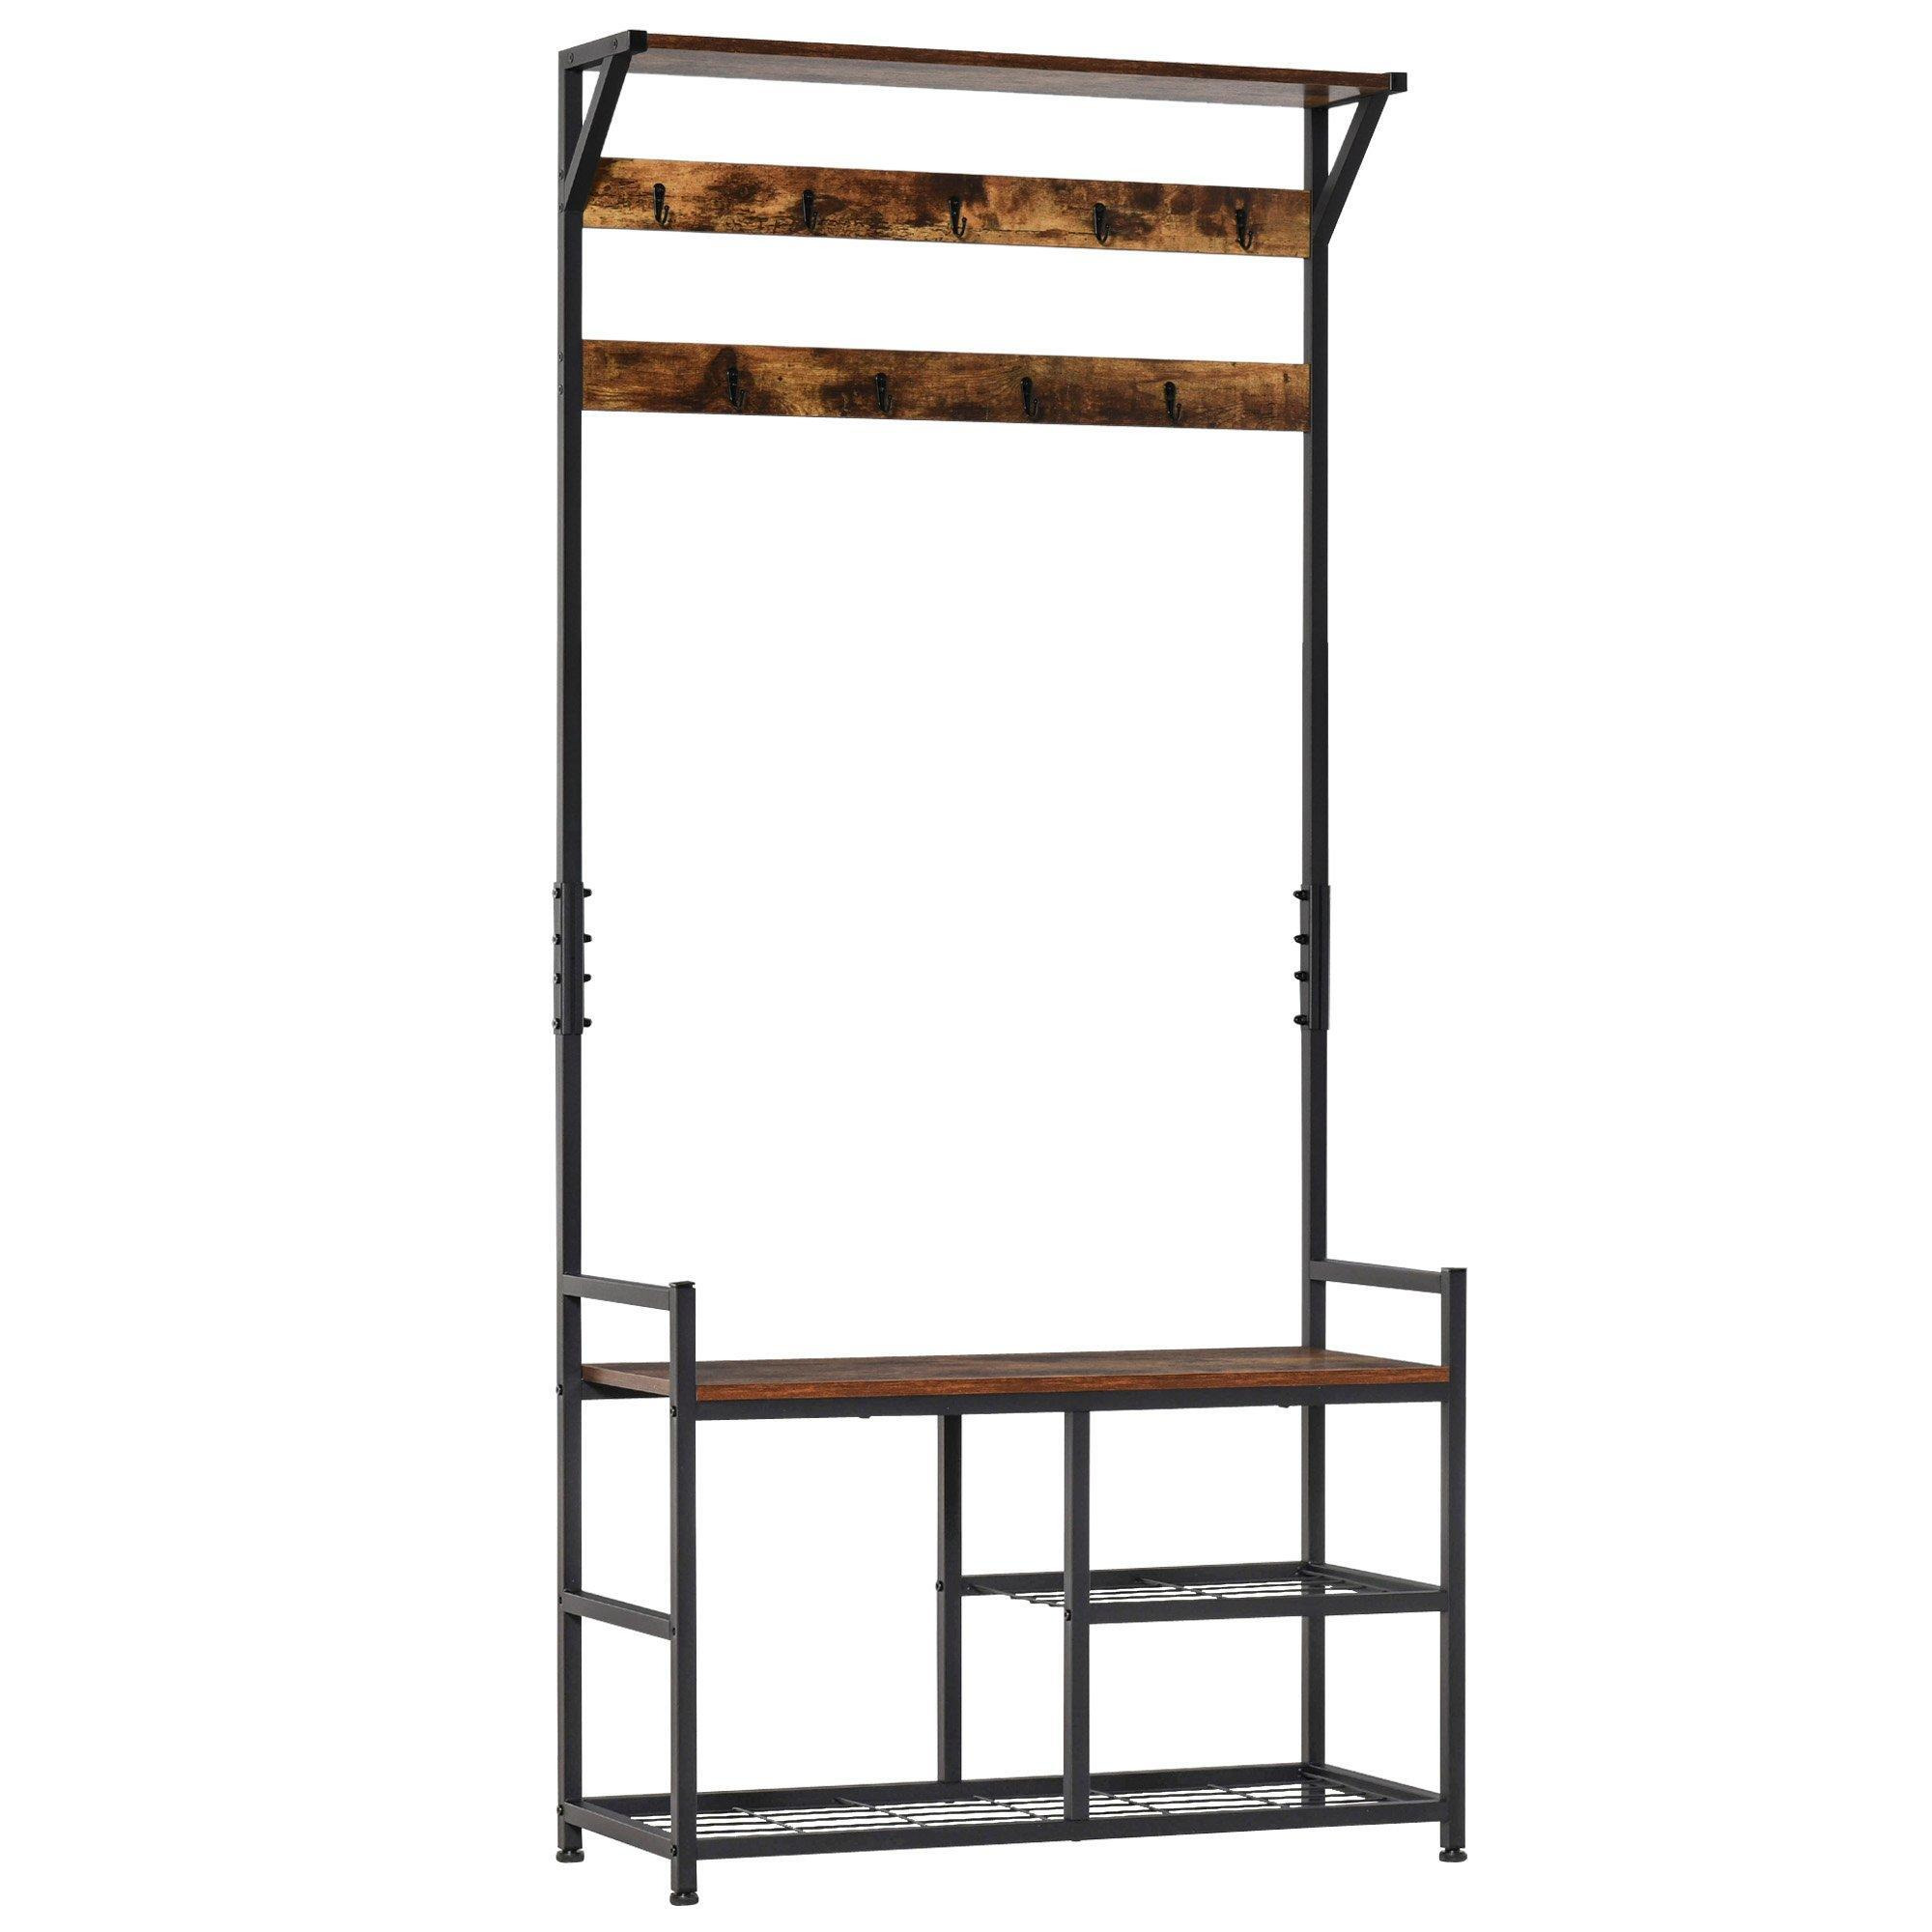 Coat Rack Stand Shoe Storage Bench with 9 Hooks Shelves - image 1